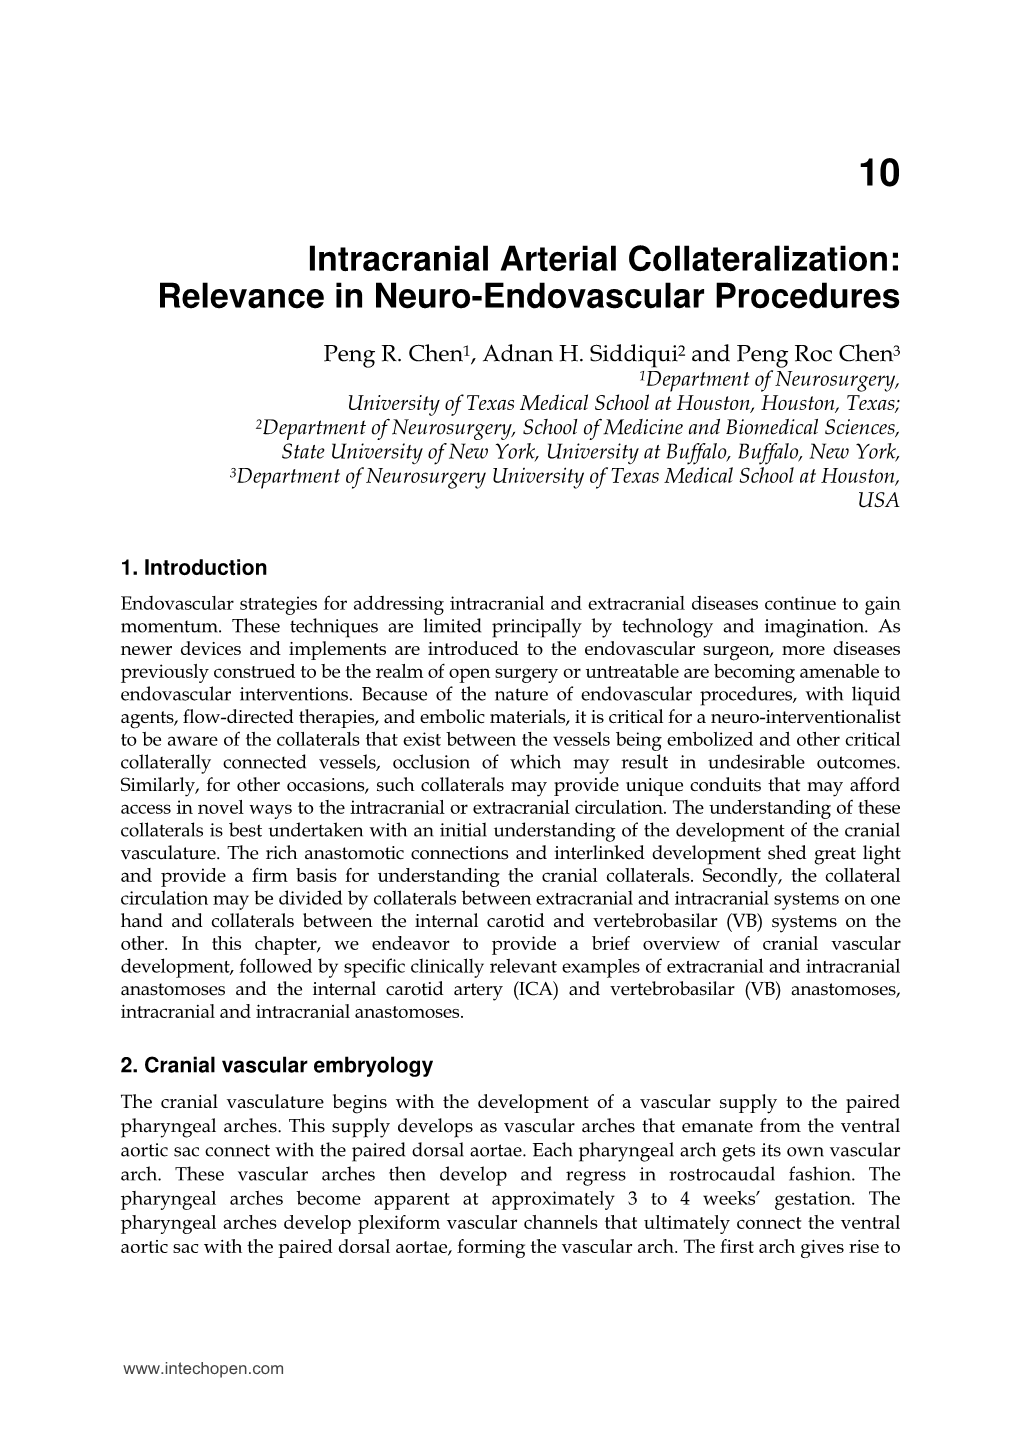 Intracranial Arterial Collateralization: Relevance in Neuro-Endovascular Procedures